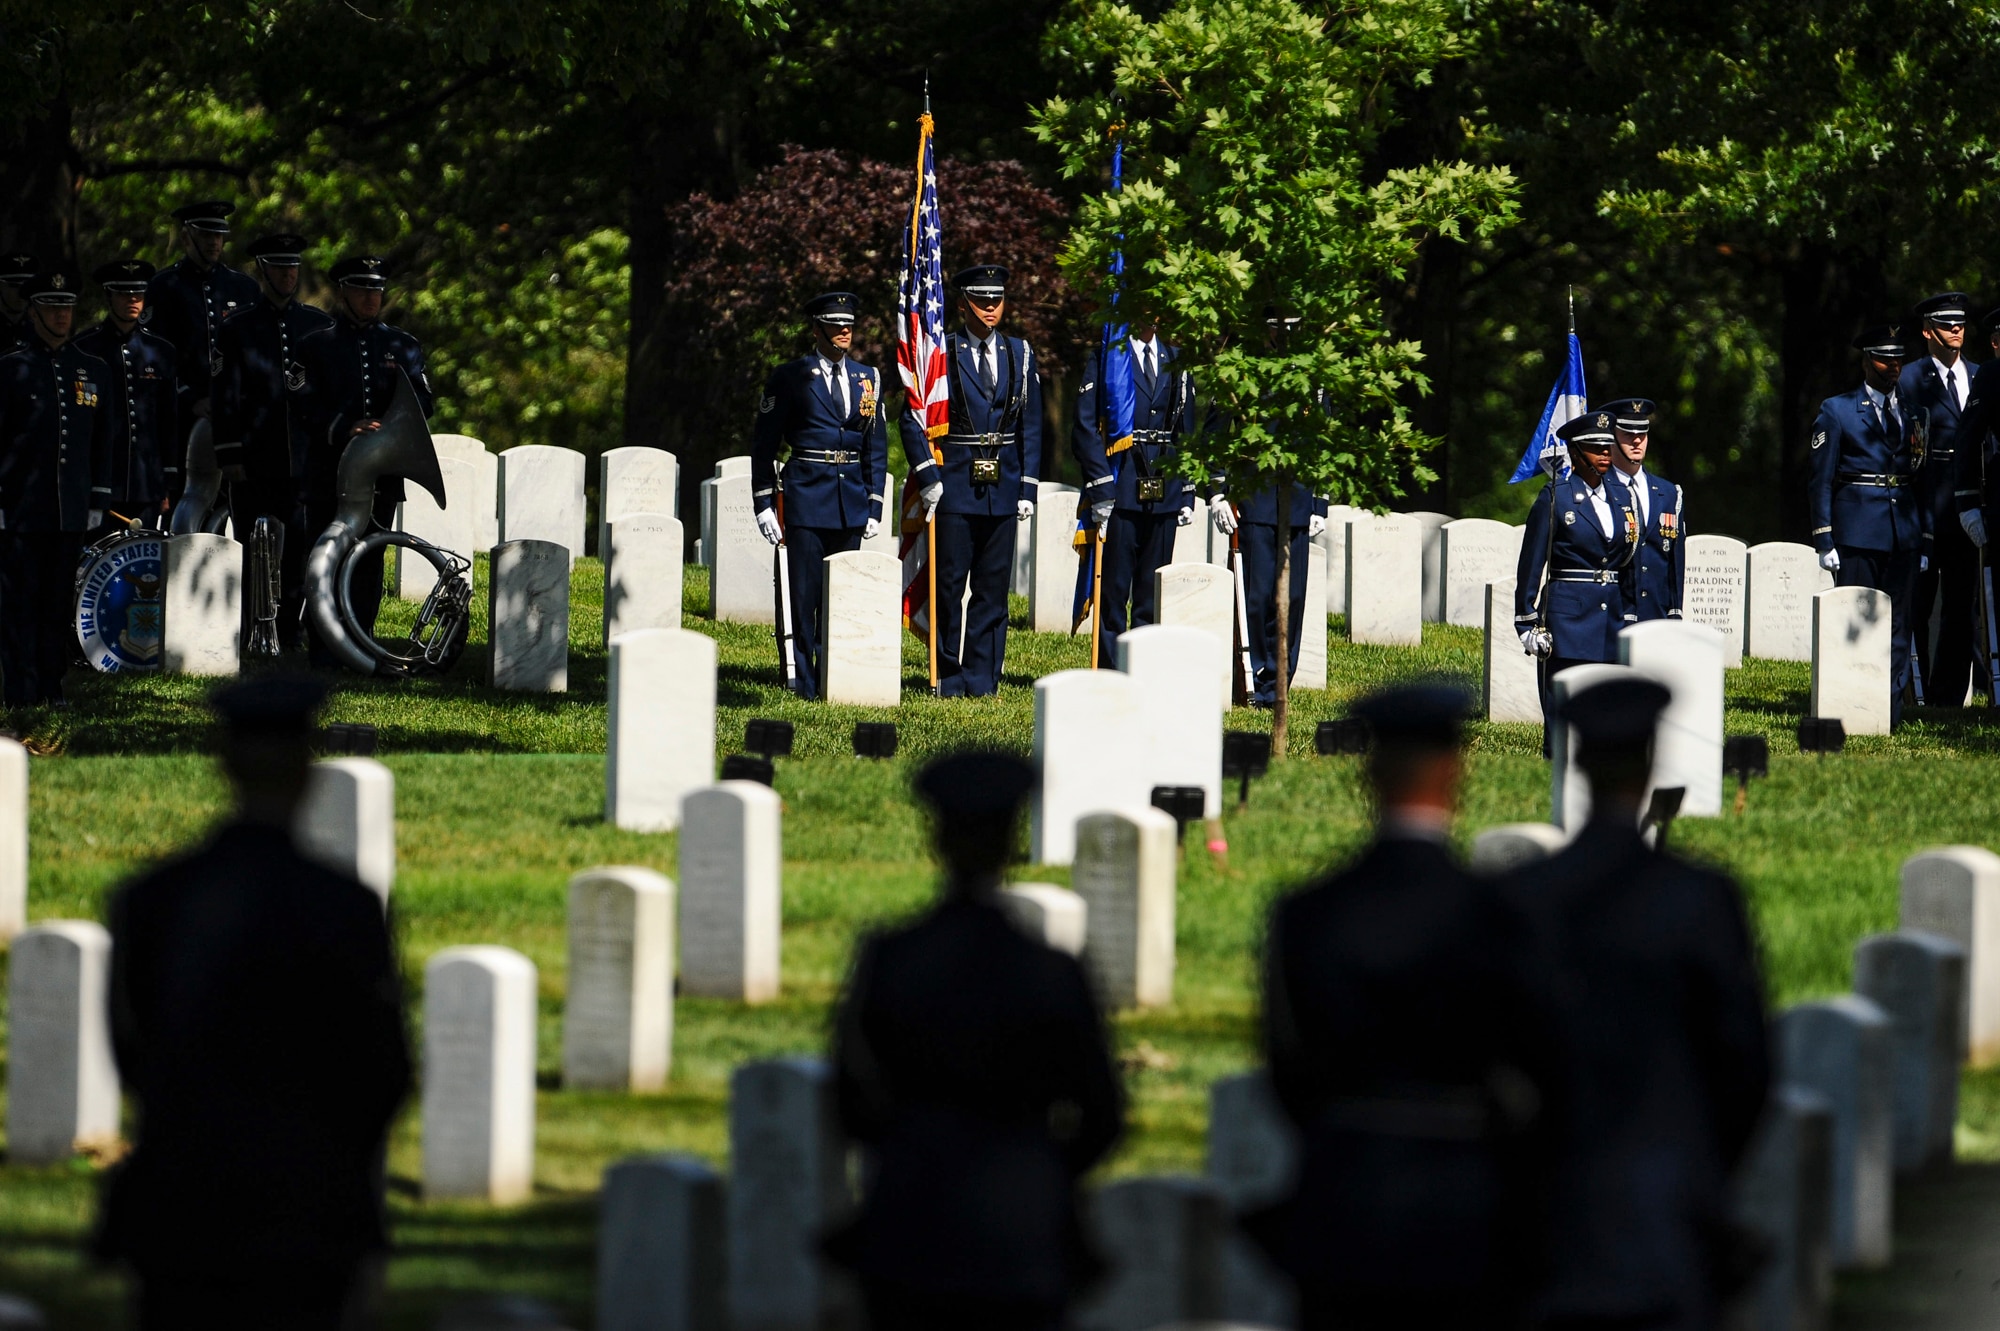 Members of the U.S. Air Force Honor Guard provide full honors for former 2nd Lt. Malvin G. Whitfield, an Army Air Forces and Air Force veteran, at Arlington National Cemetery, Va., June 8, 2016. (U.S. Air Force photo/Tech. Sgt. Bryan Franks)